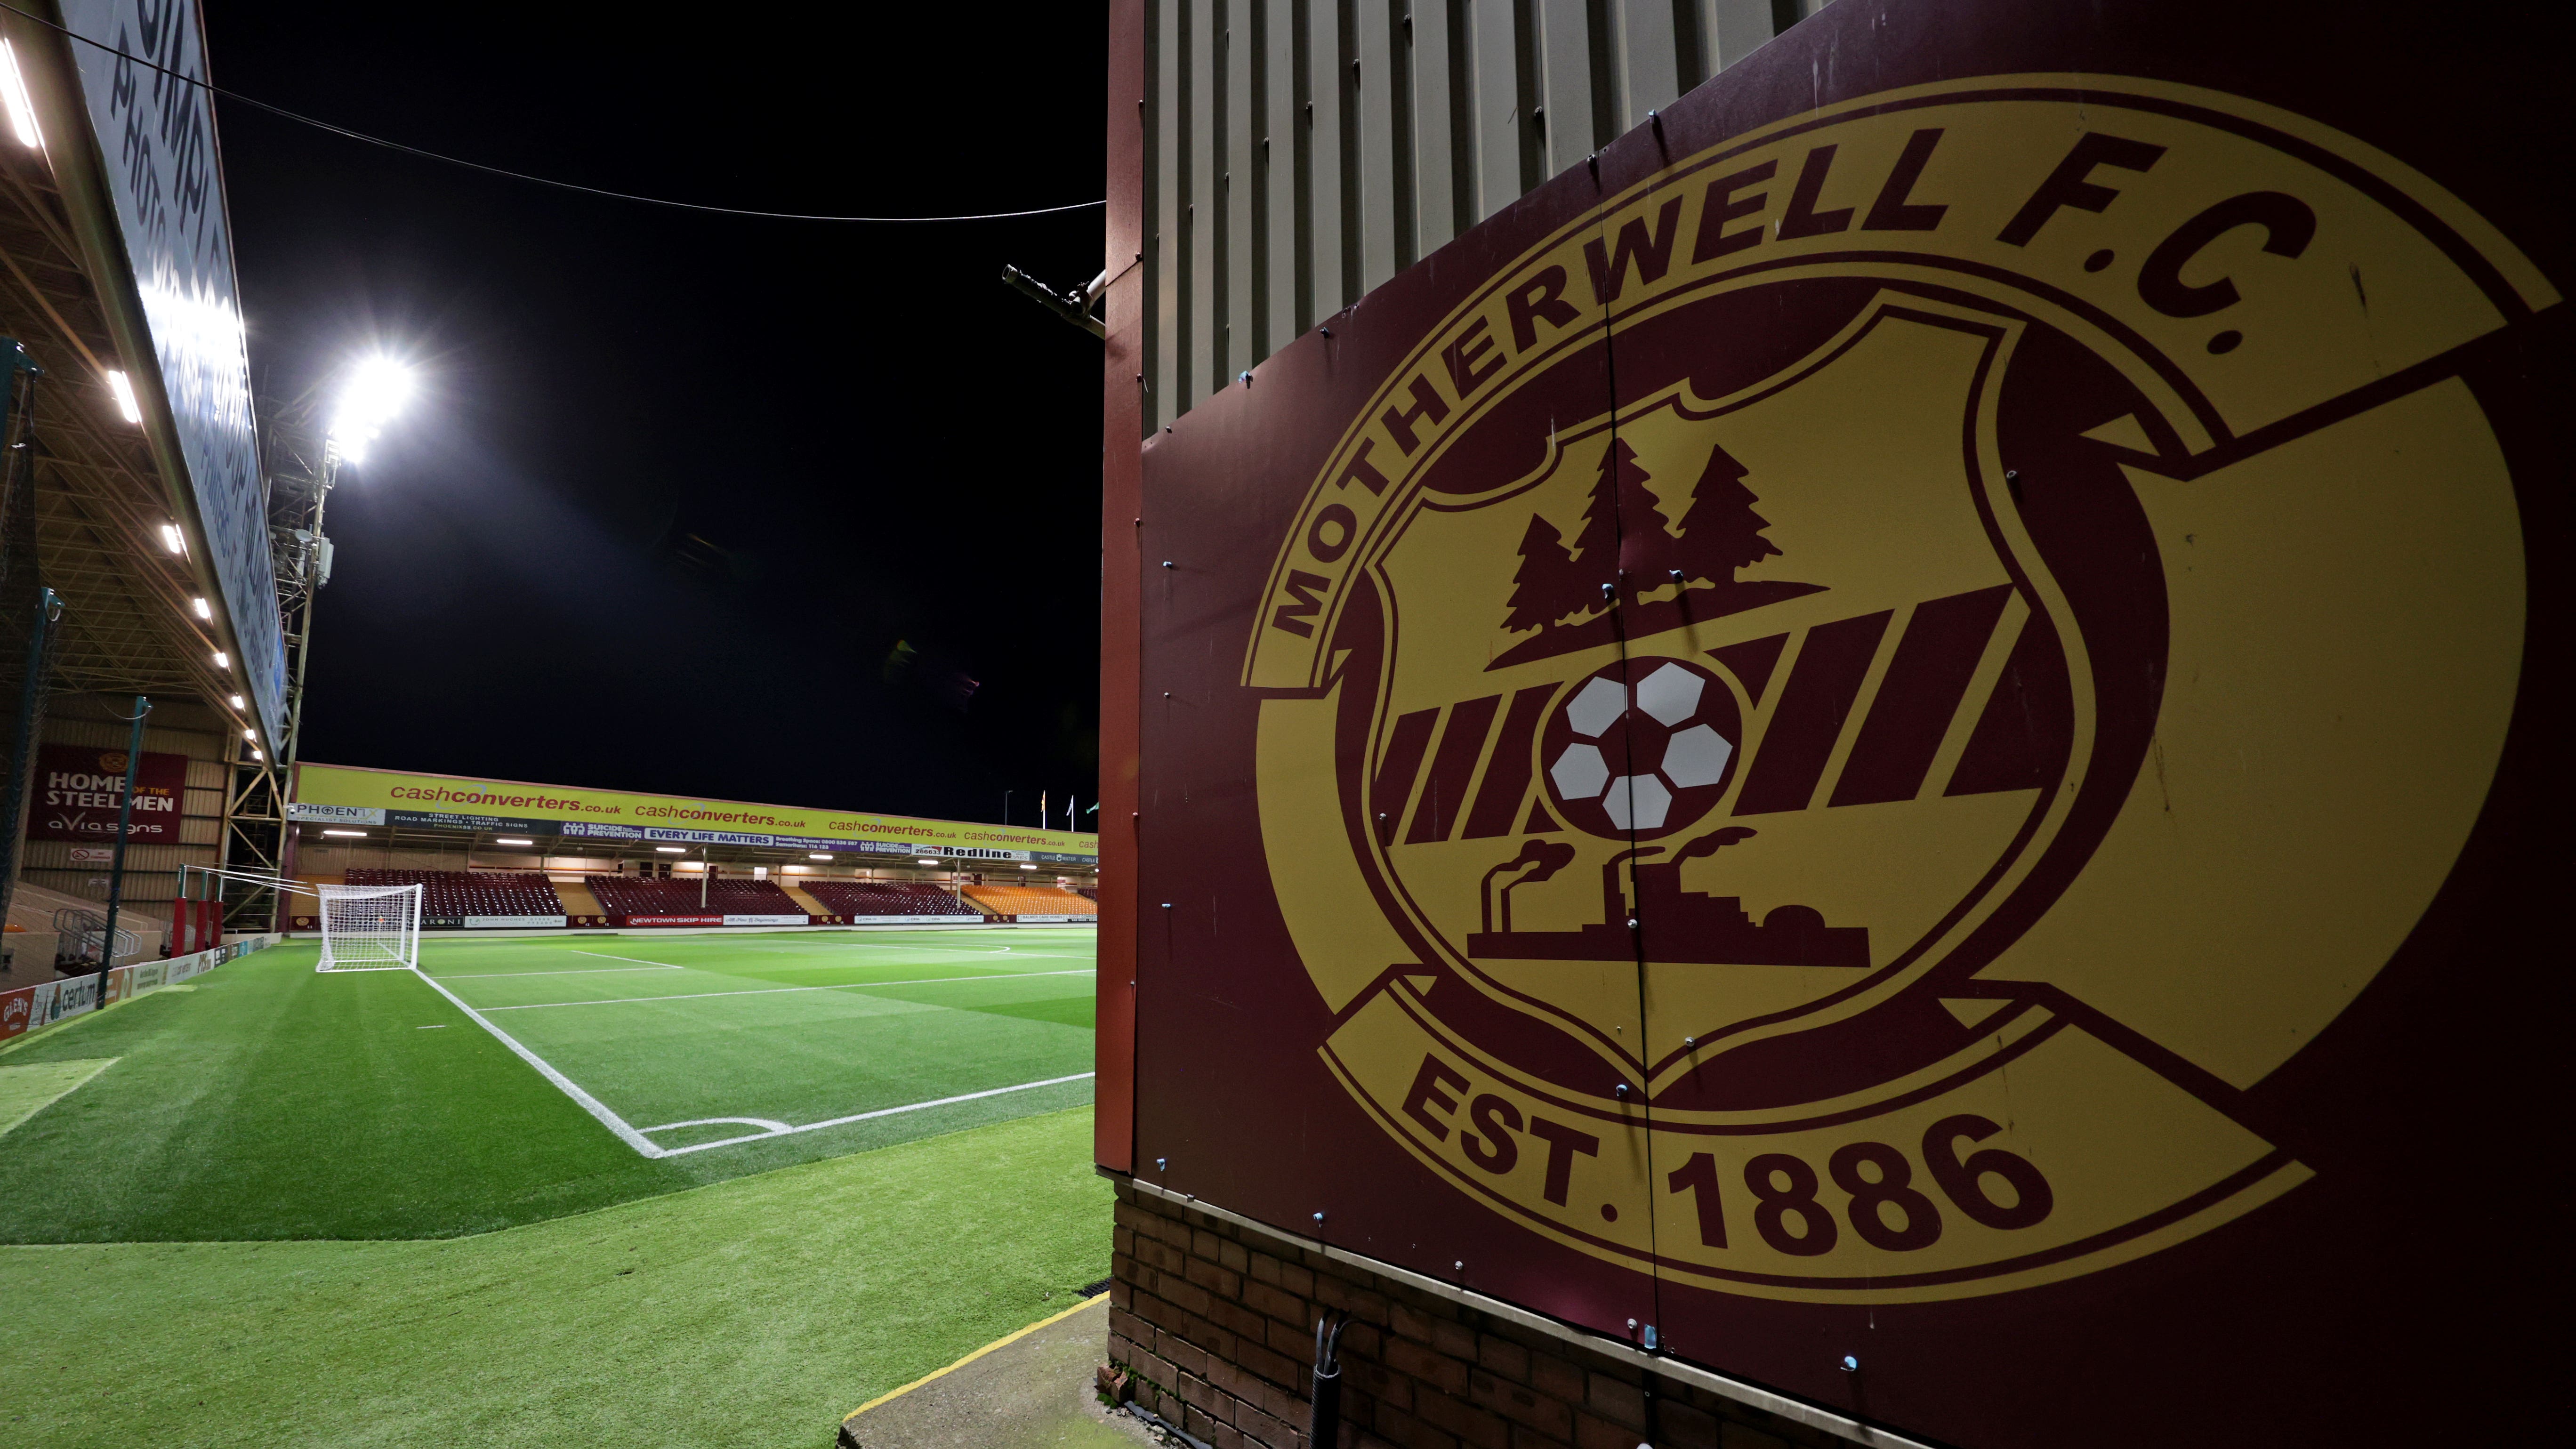 Motherwell would be happy to hear from Hollywood as they seek new investment